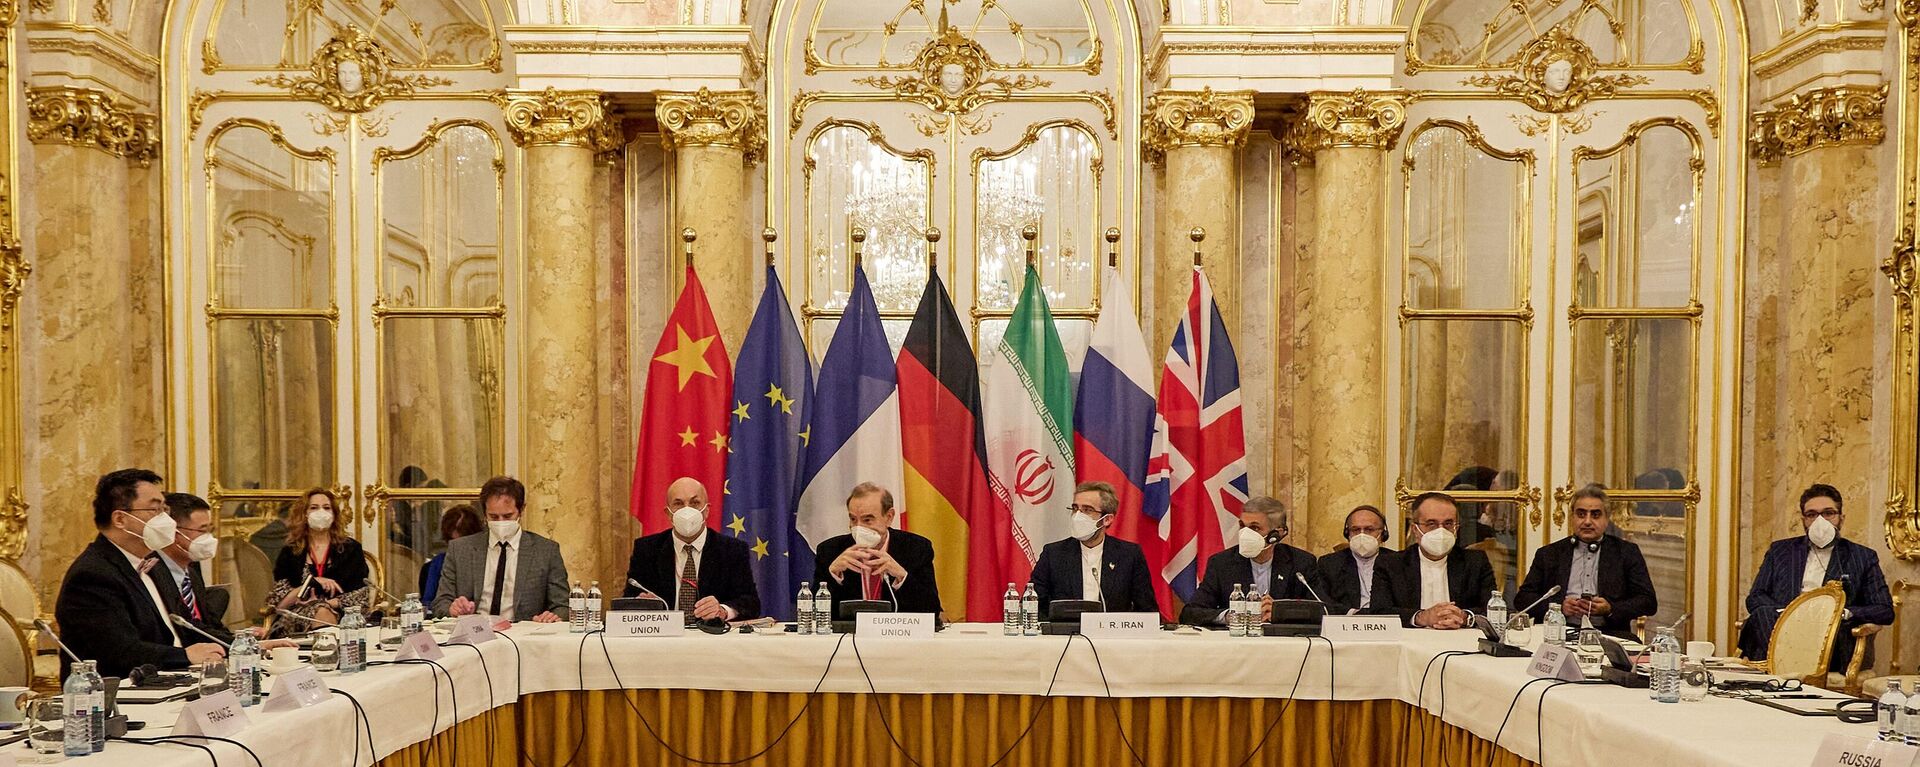 This handout photo taken and released on December 9, 2021 by the EU delegation in Vienna - EEAS shows representatives attending a meeting of the joint commission on negotiations aimed at reviving the Iran nuclear deal in Vienna, Austria. - Negotiators of the Iranian nuclear deal met on December 9, 2021, 'determined to work hard' to save the 2015 deal after the suspension of talks last week. (Photo by Handout / EU DELEGATION IN VIENNA / AFP)  - Sputnik International, 1920, 13.09.2022